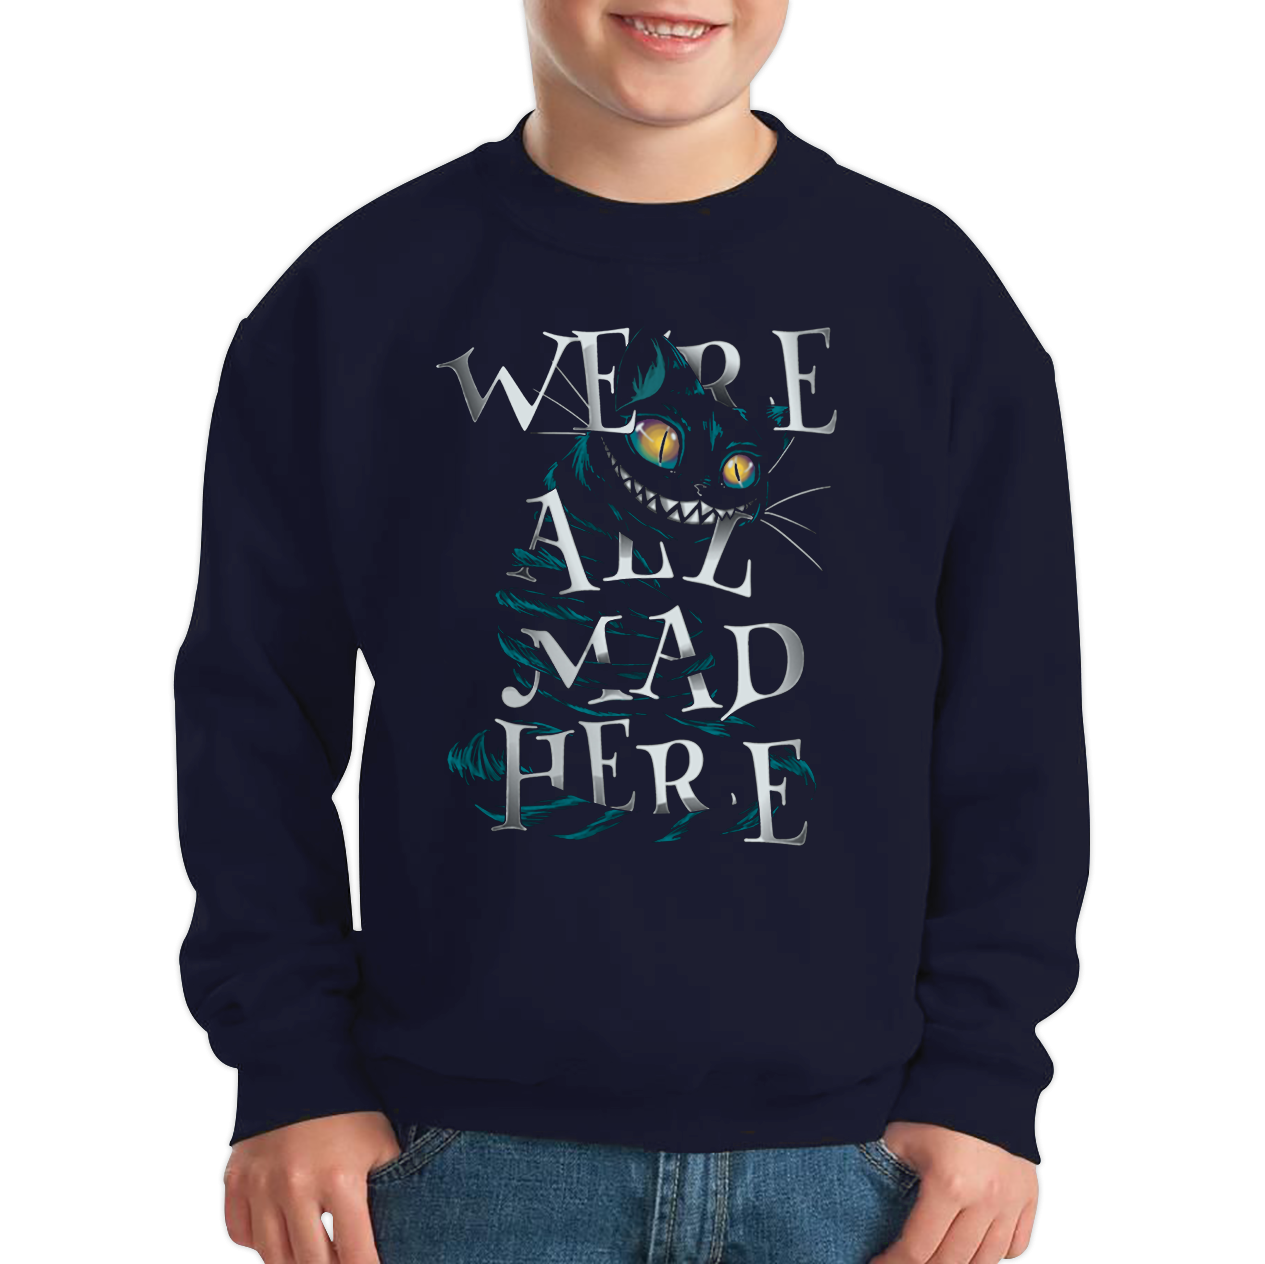 We Are All Mad Here Alice in Wonderland Quote Fantasy Family Film Kids Sweatshirt